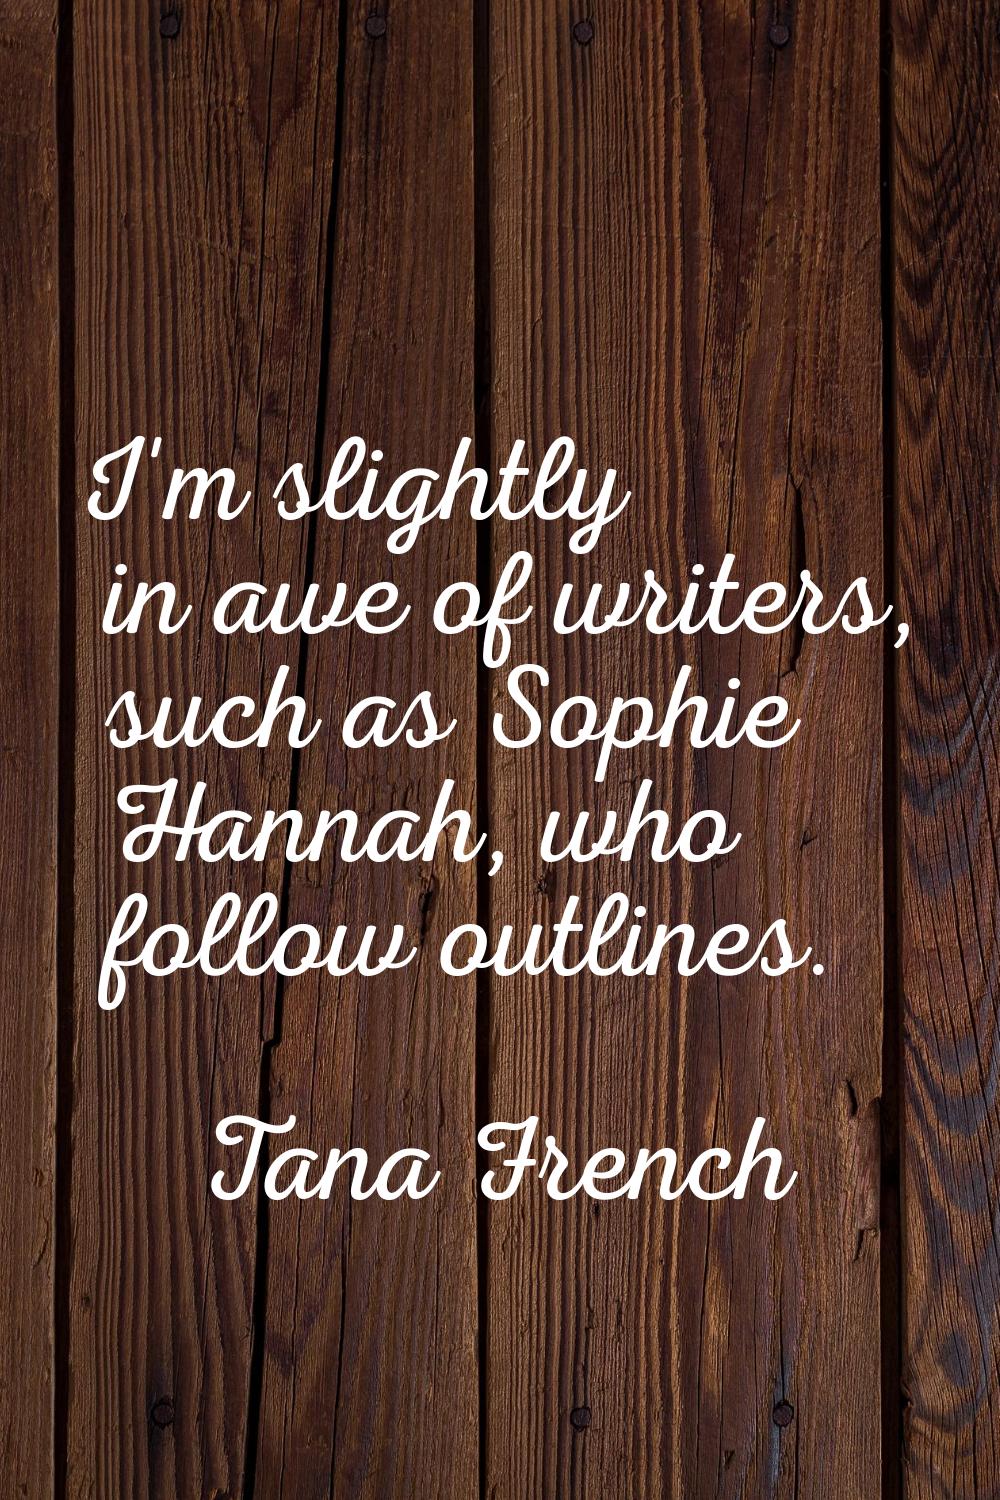 I'm slightly in awe of writers, such as Sophie Hannah, who follow outlines.